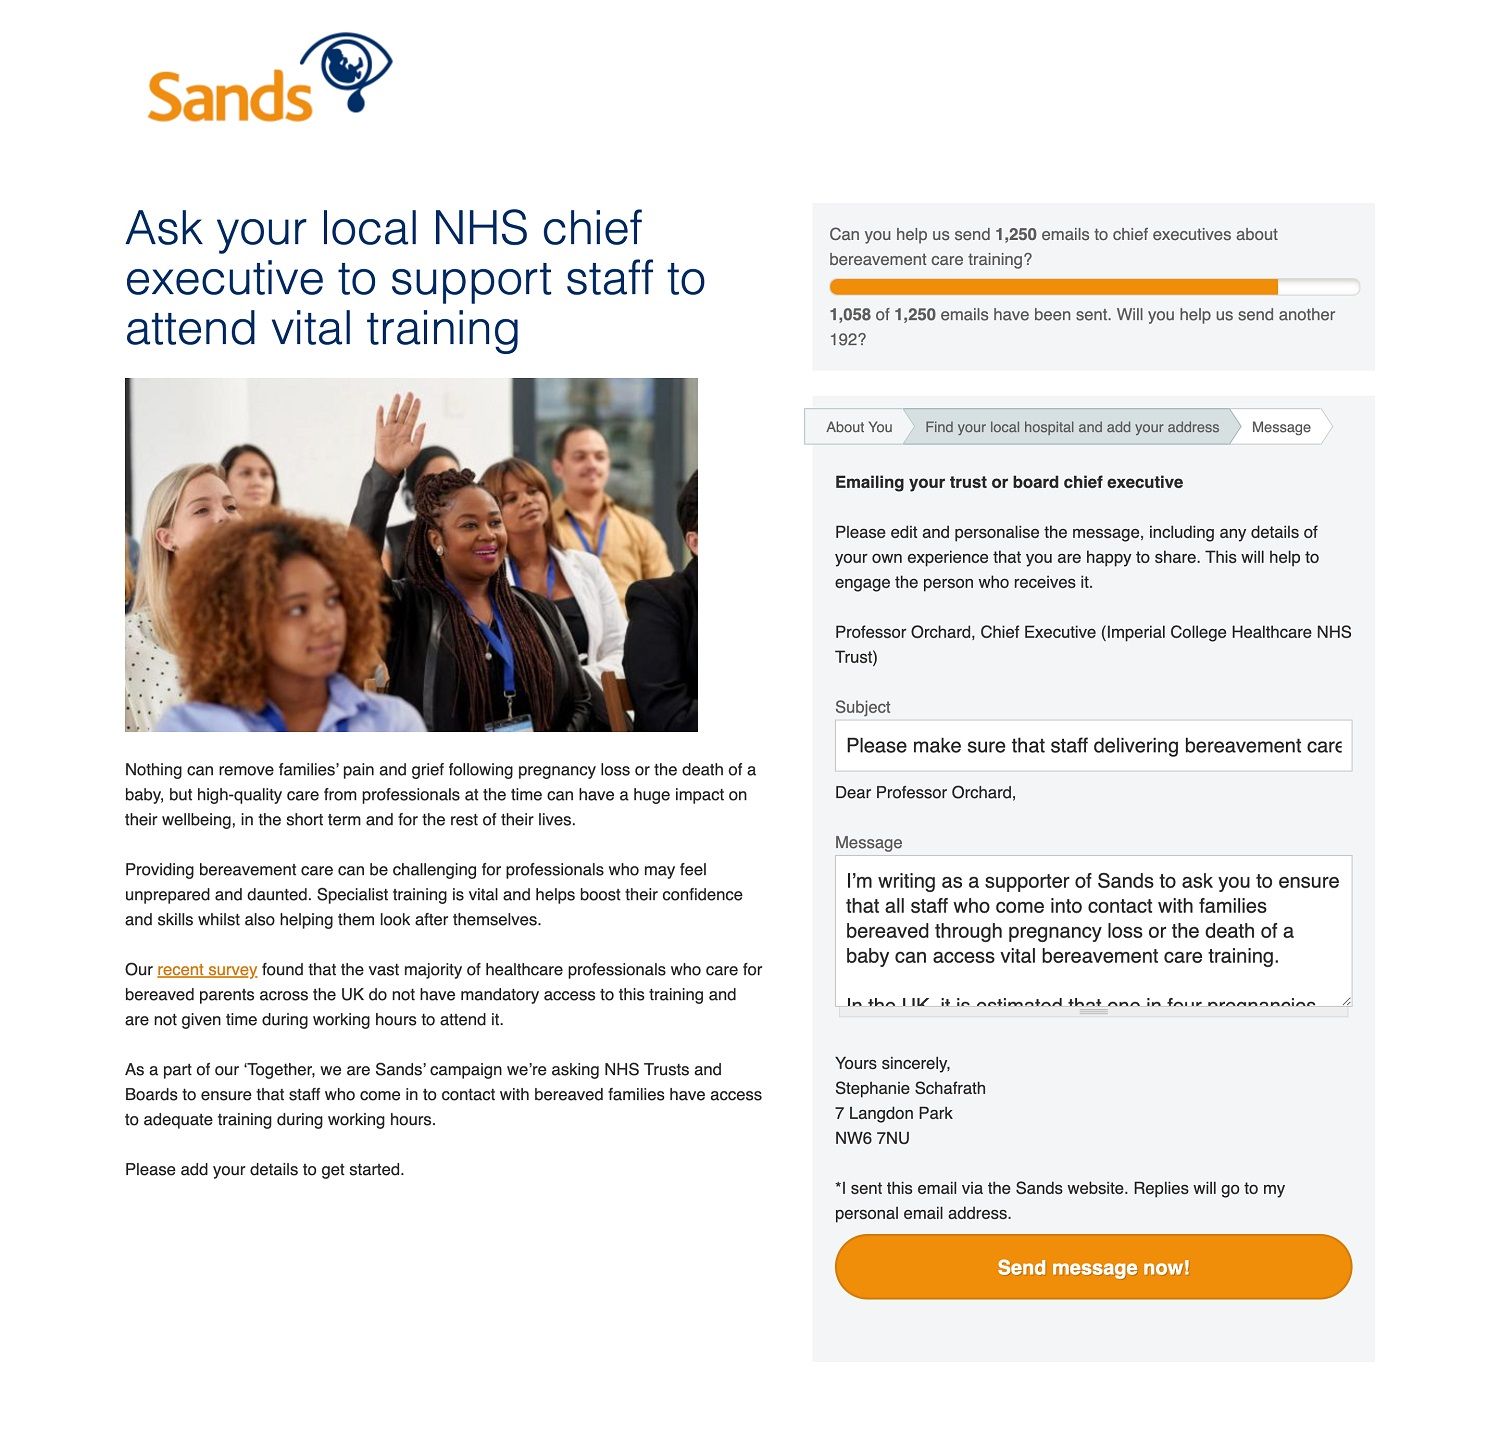 Webpage: Sands campaign action 'Ask your local NHS chief executiev to support staff to attend vital training. Form step shows 'Edit and personalise your message'